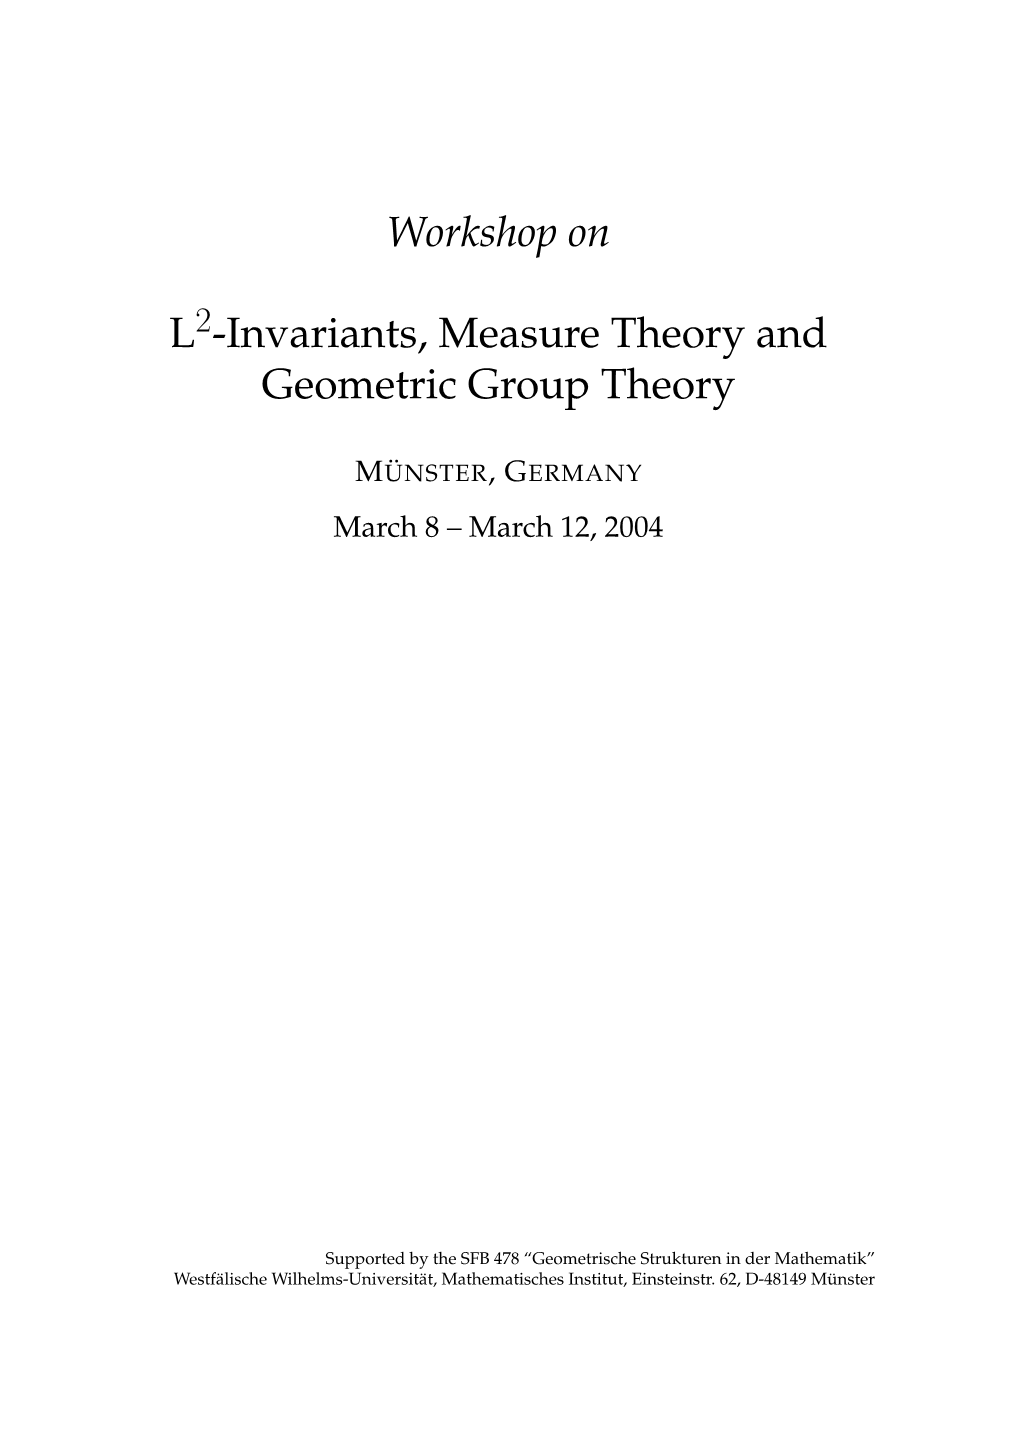 Workshop on L -Invariants, Measure Theory and Geometric Group Theory